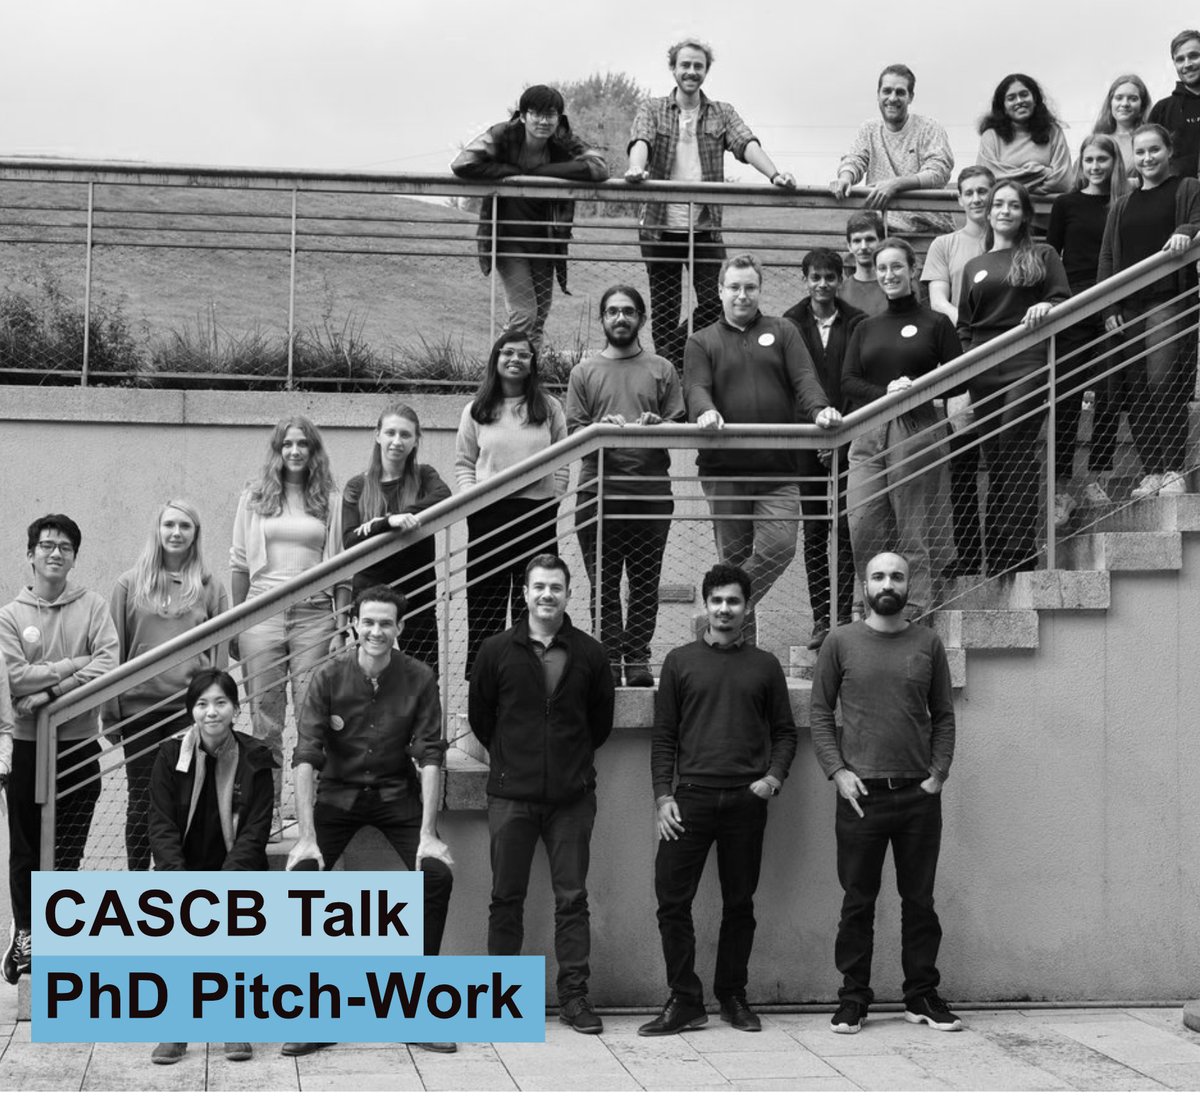 The @CBehav seminar series continues today! Members of the CASCB Doctoral Network present exciting glimpses into their projects in the PhD Pitchwork. Join in person on 29 April, noon @UniKonstanz, ZT 702 or online: exc.uni-konstanz.de/collective-beh…